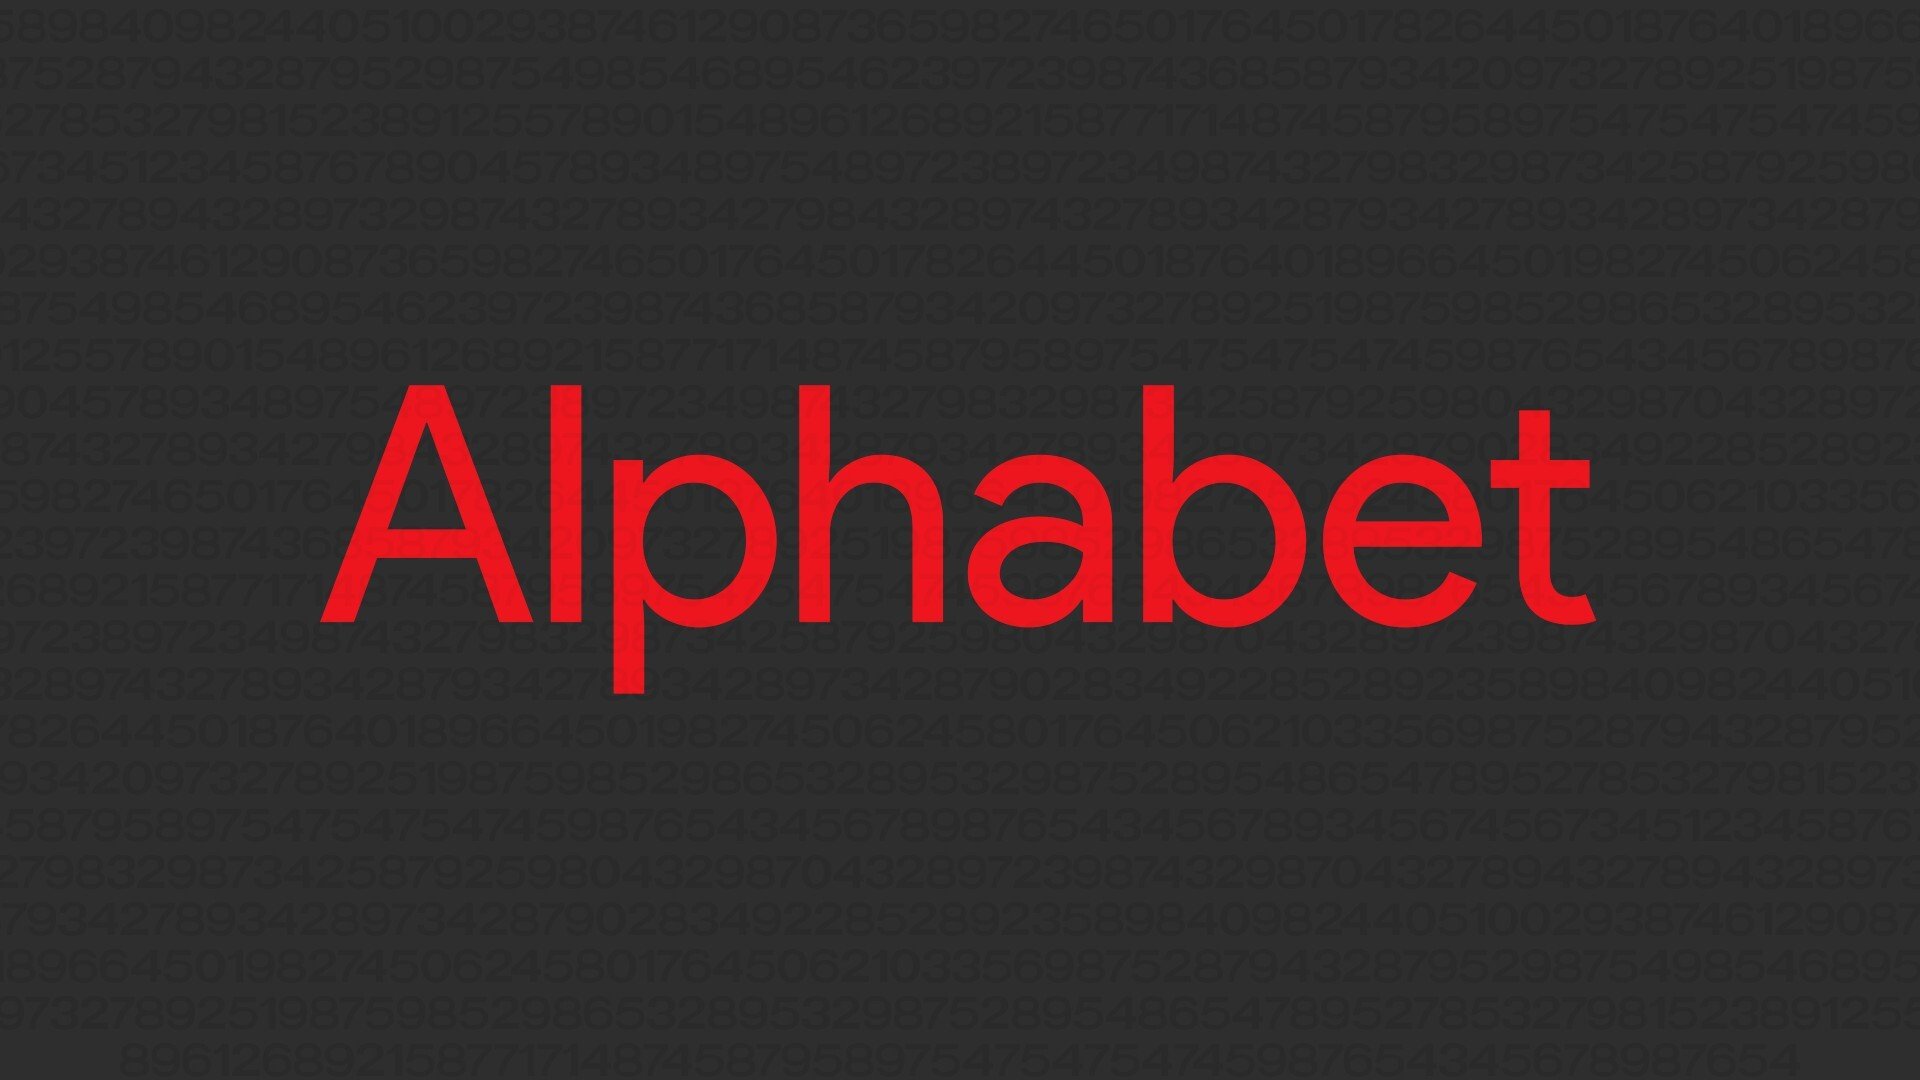 Alphabet Results Numbers